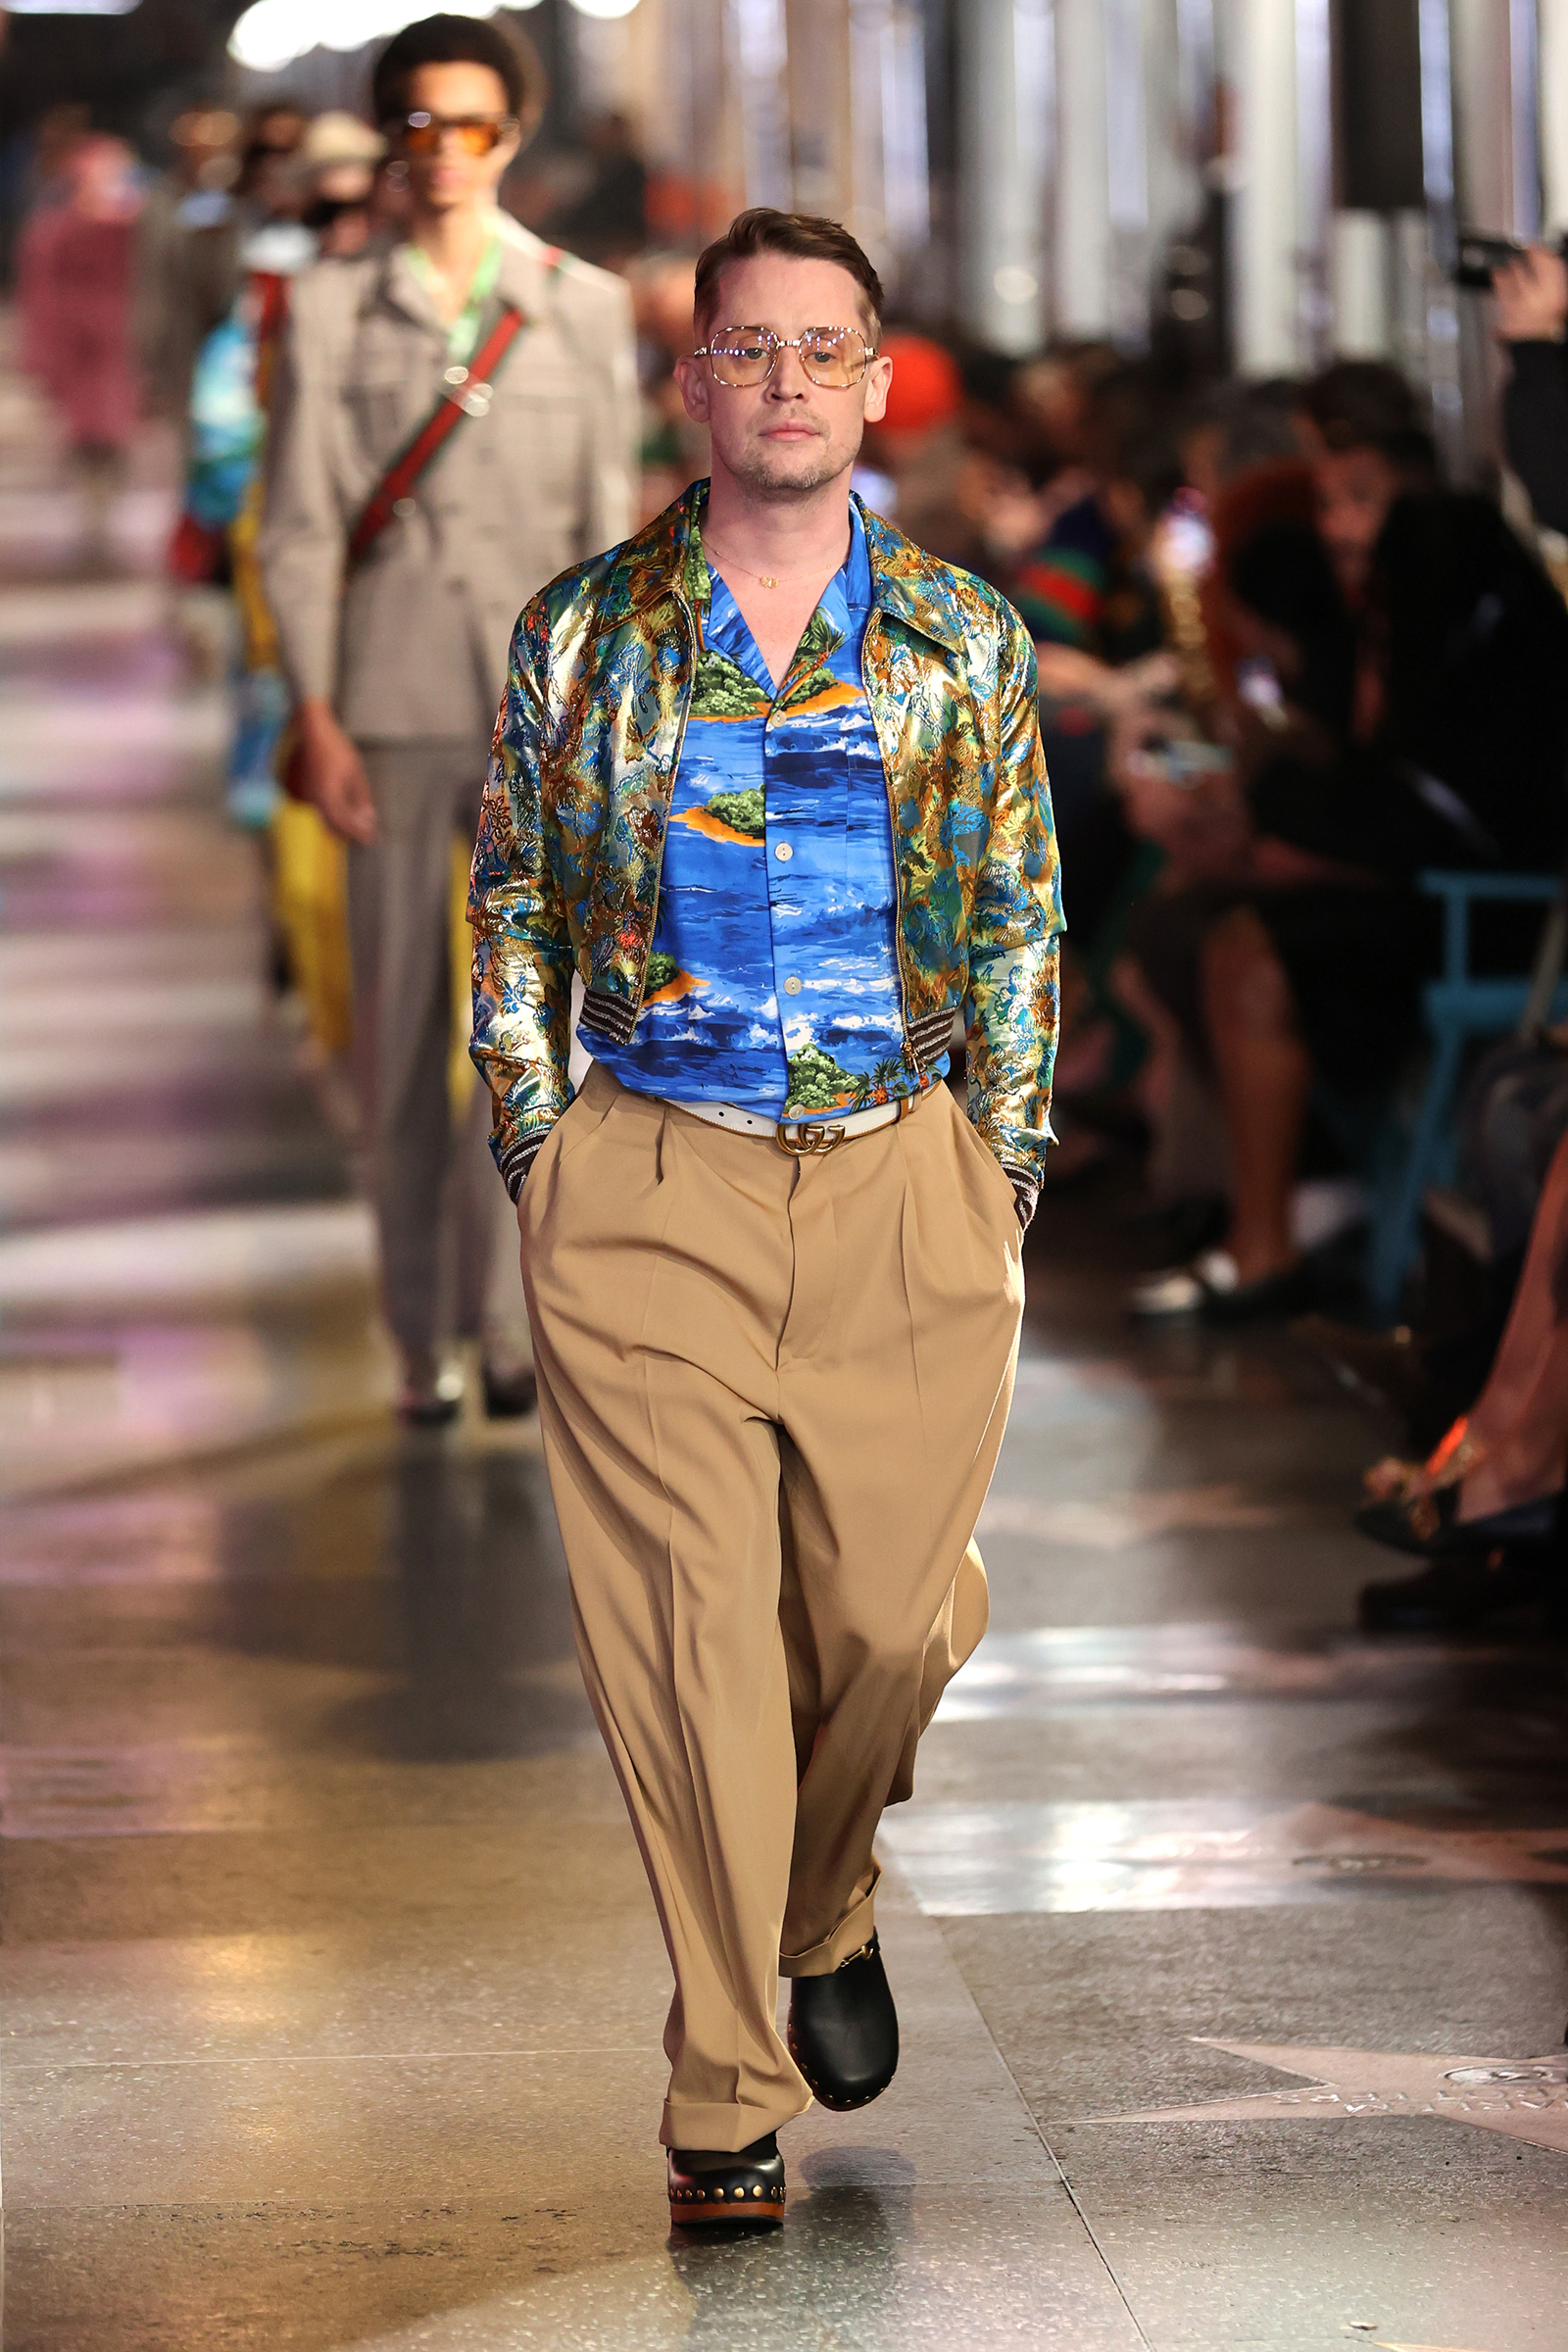 Macaulay Culkin and Jared join celebrity models at Gucci Love Parade show - CNN Style